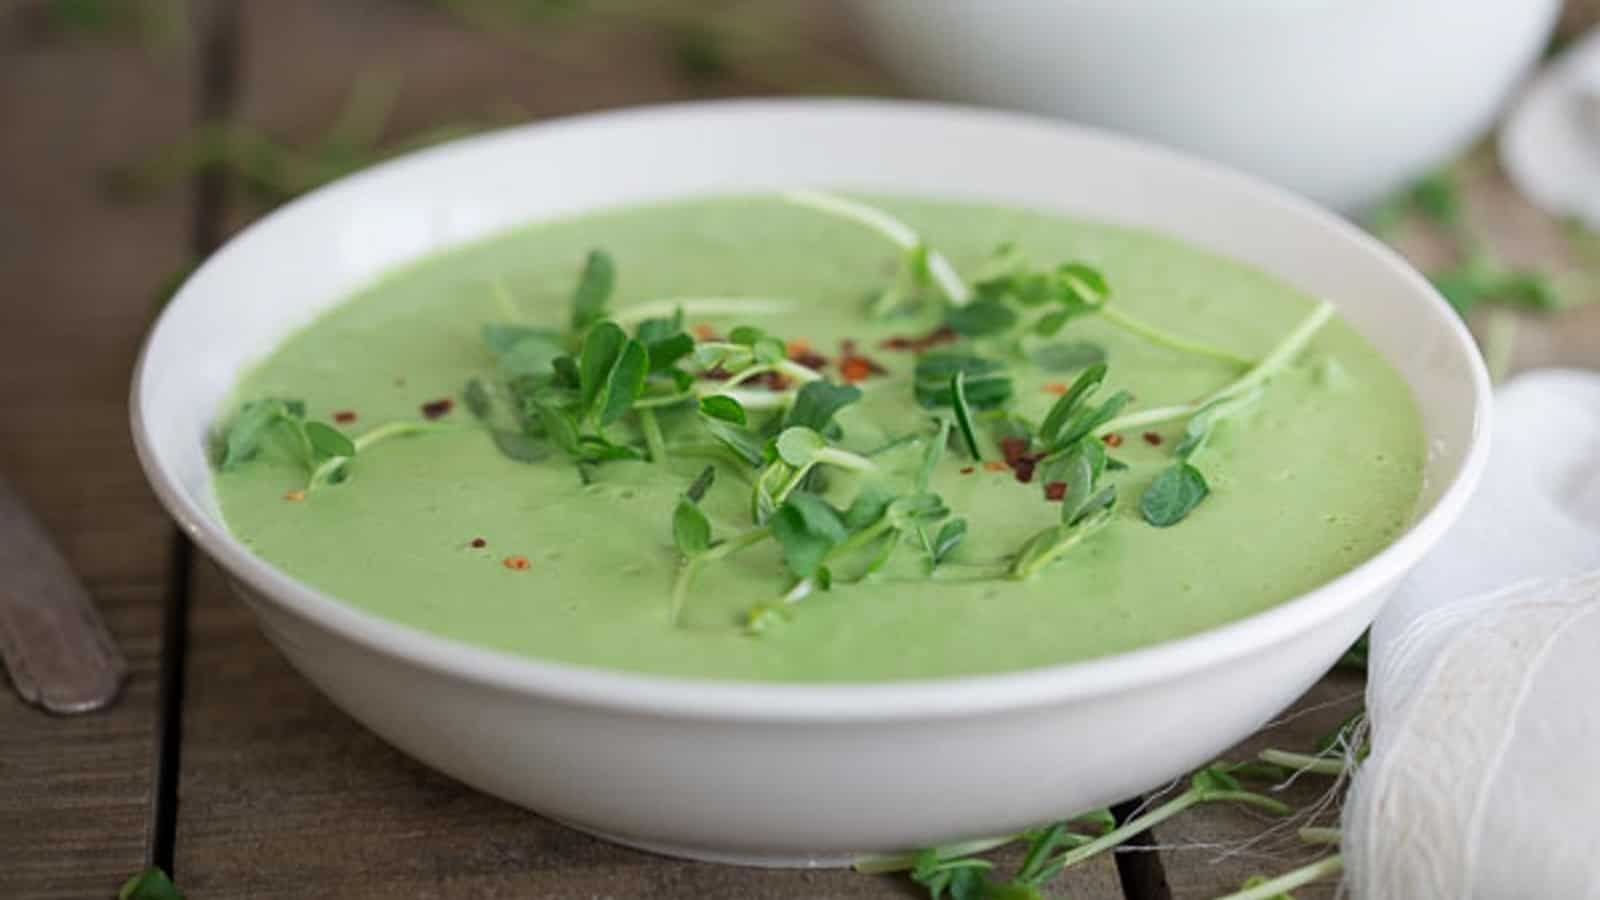 Thai pea soup garnished with pea shoots in a white bowl.